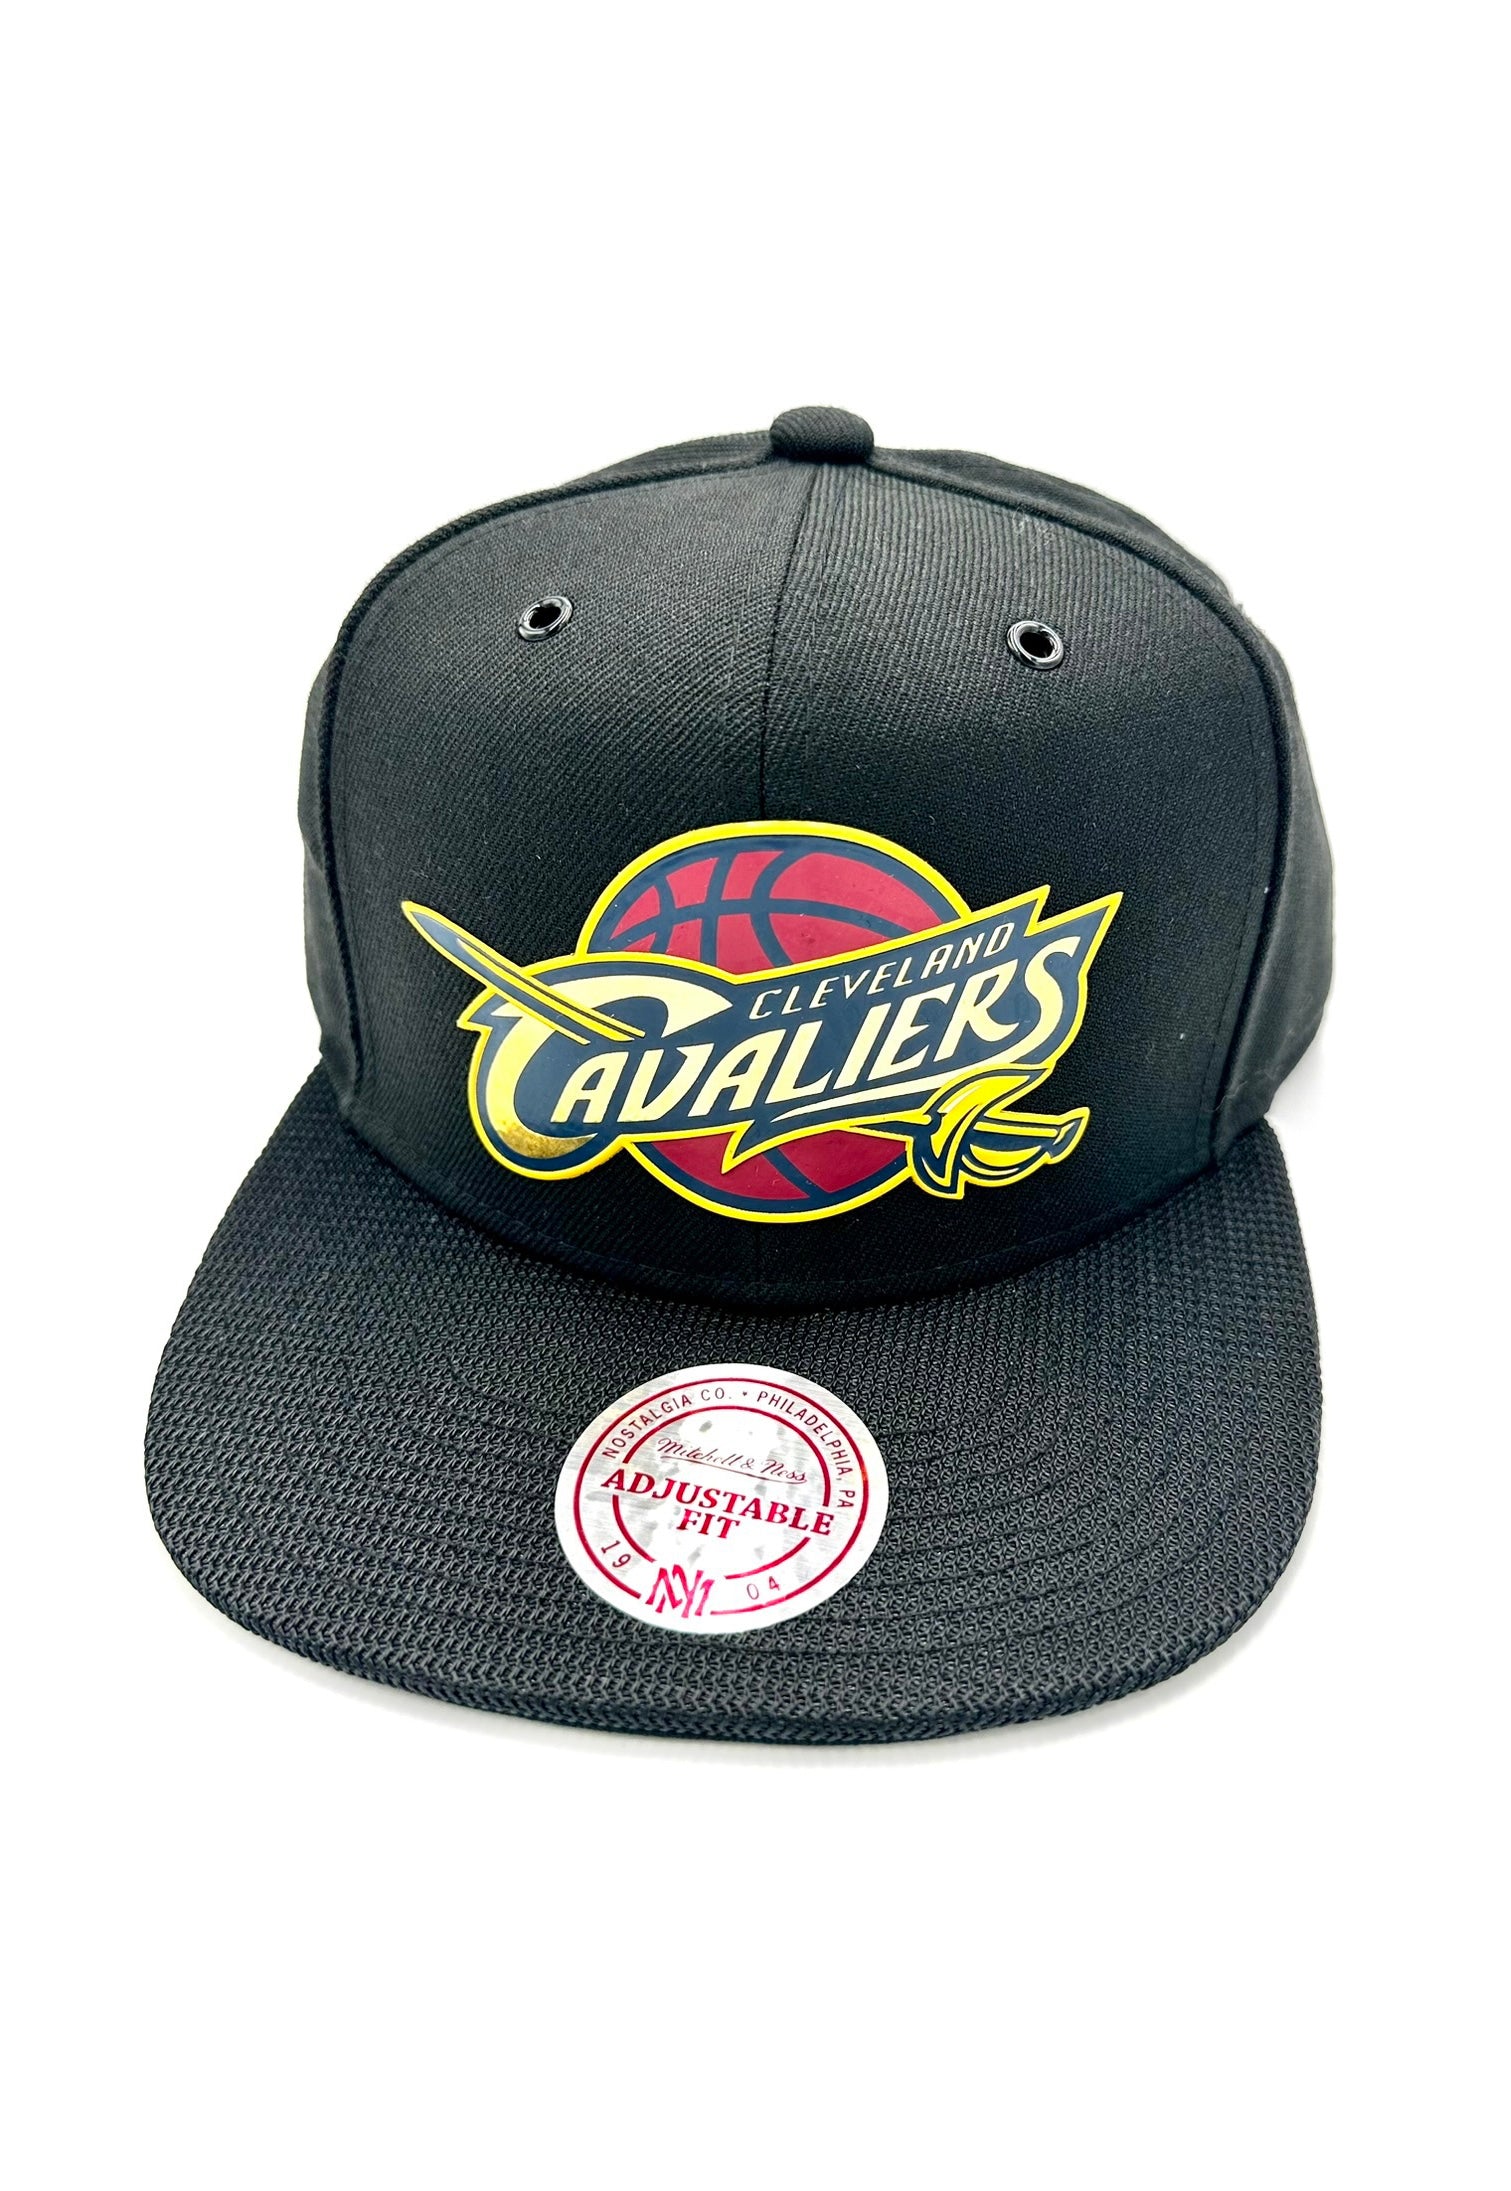 mitchell and ness cavs hat